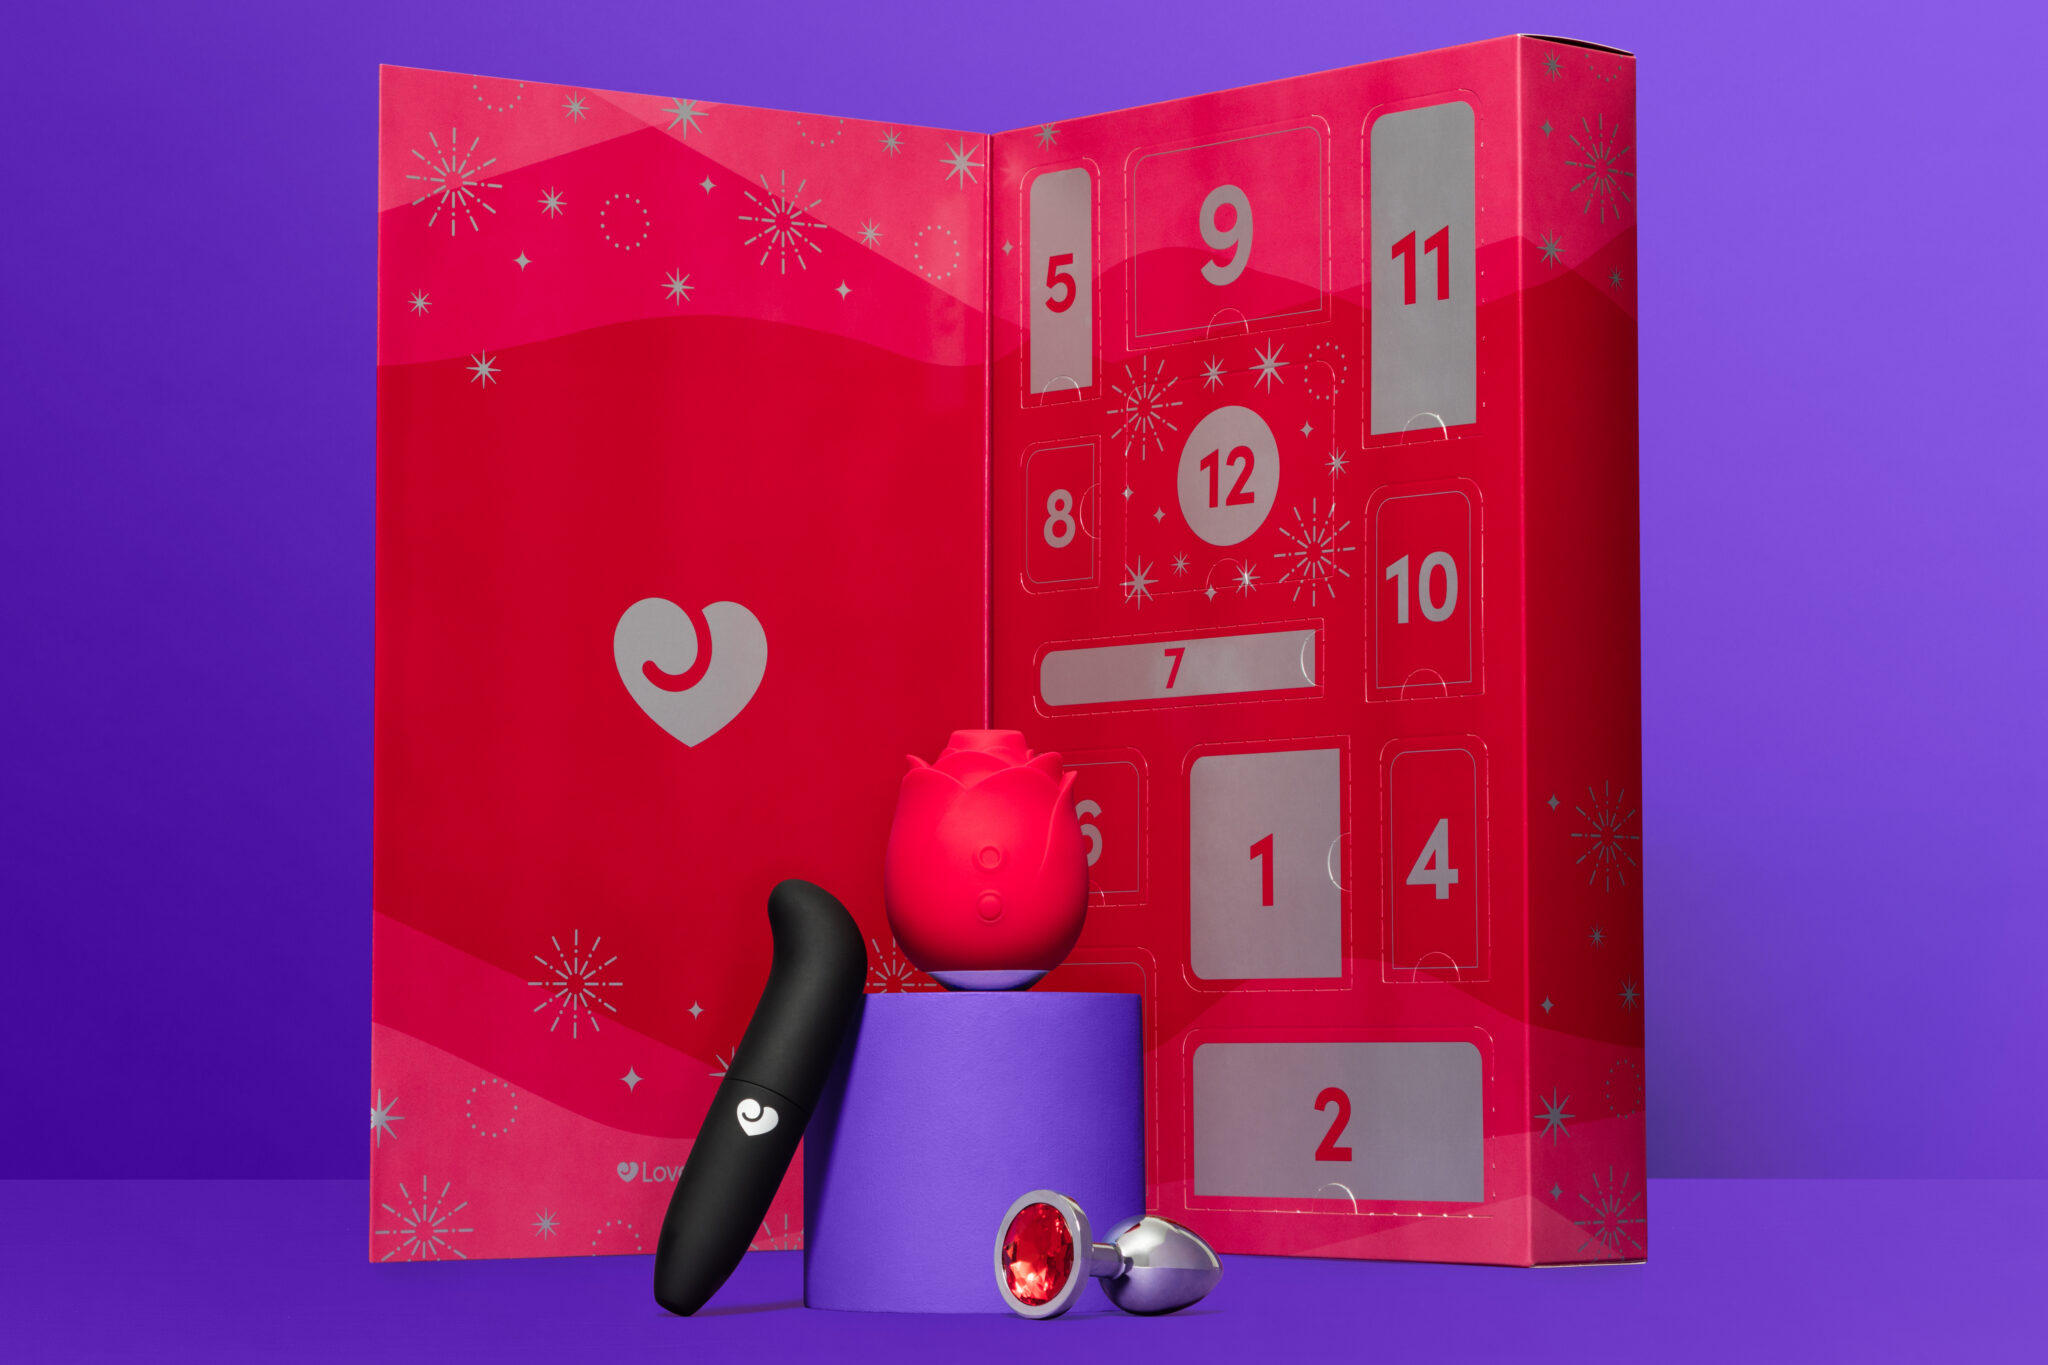 A full image of three of the pieces from the 12-piece calendar, including a red jeweled butt plug.